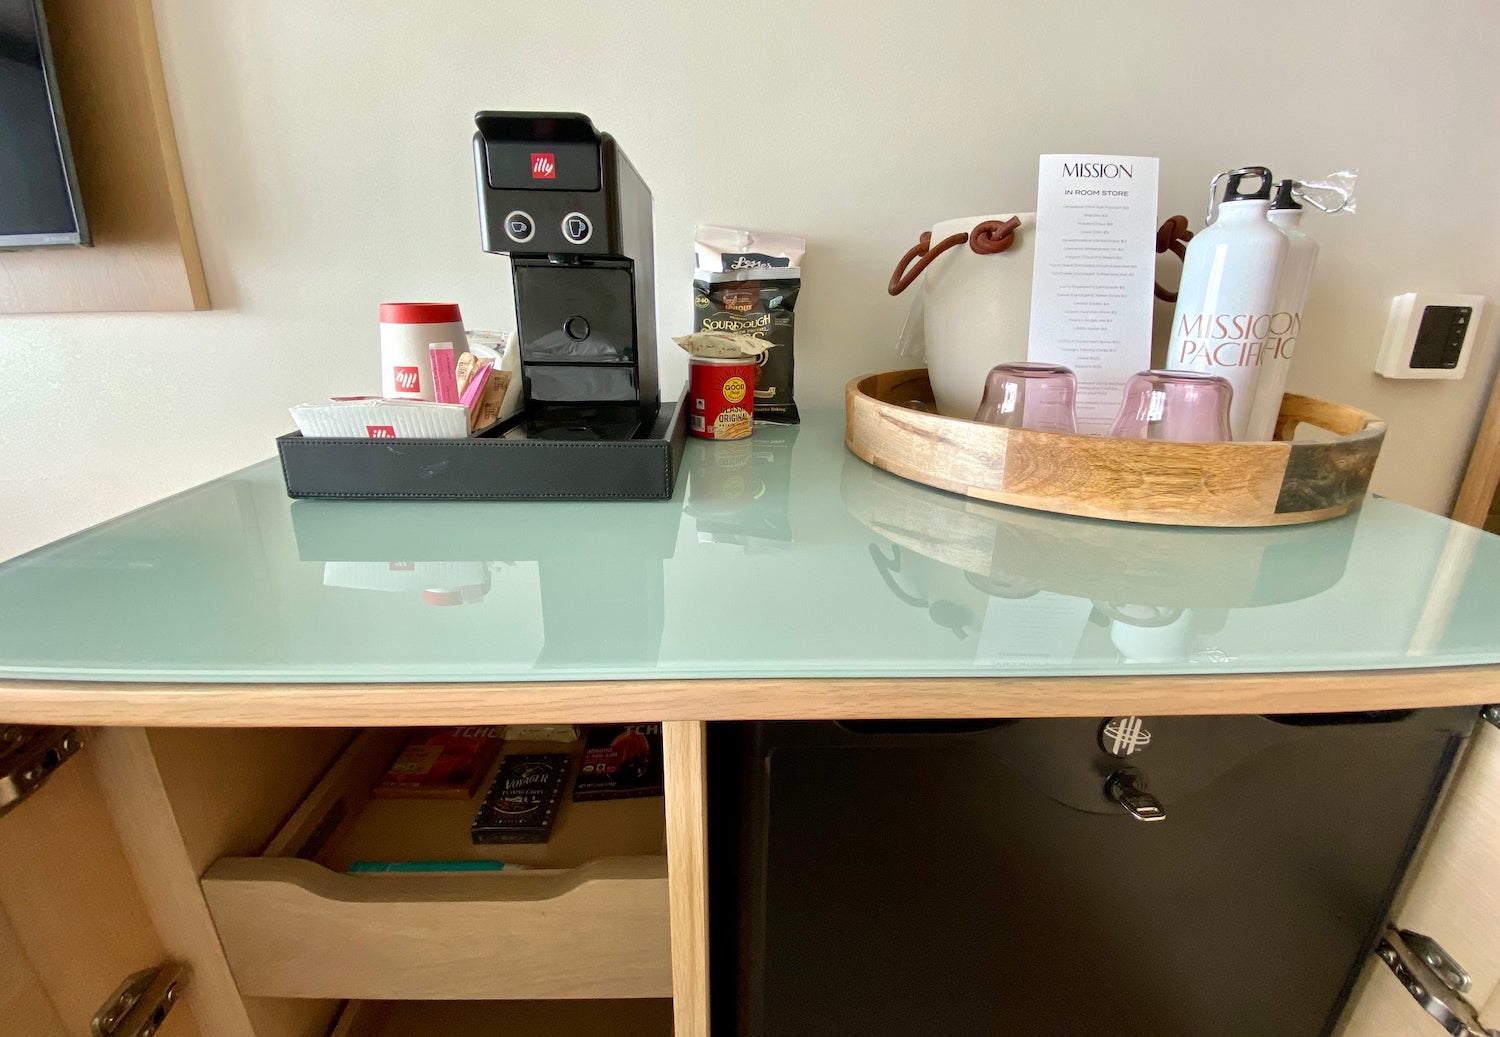 Snack station with coffee maker, cups and bottles